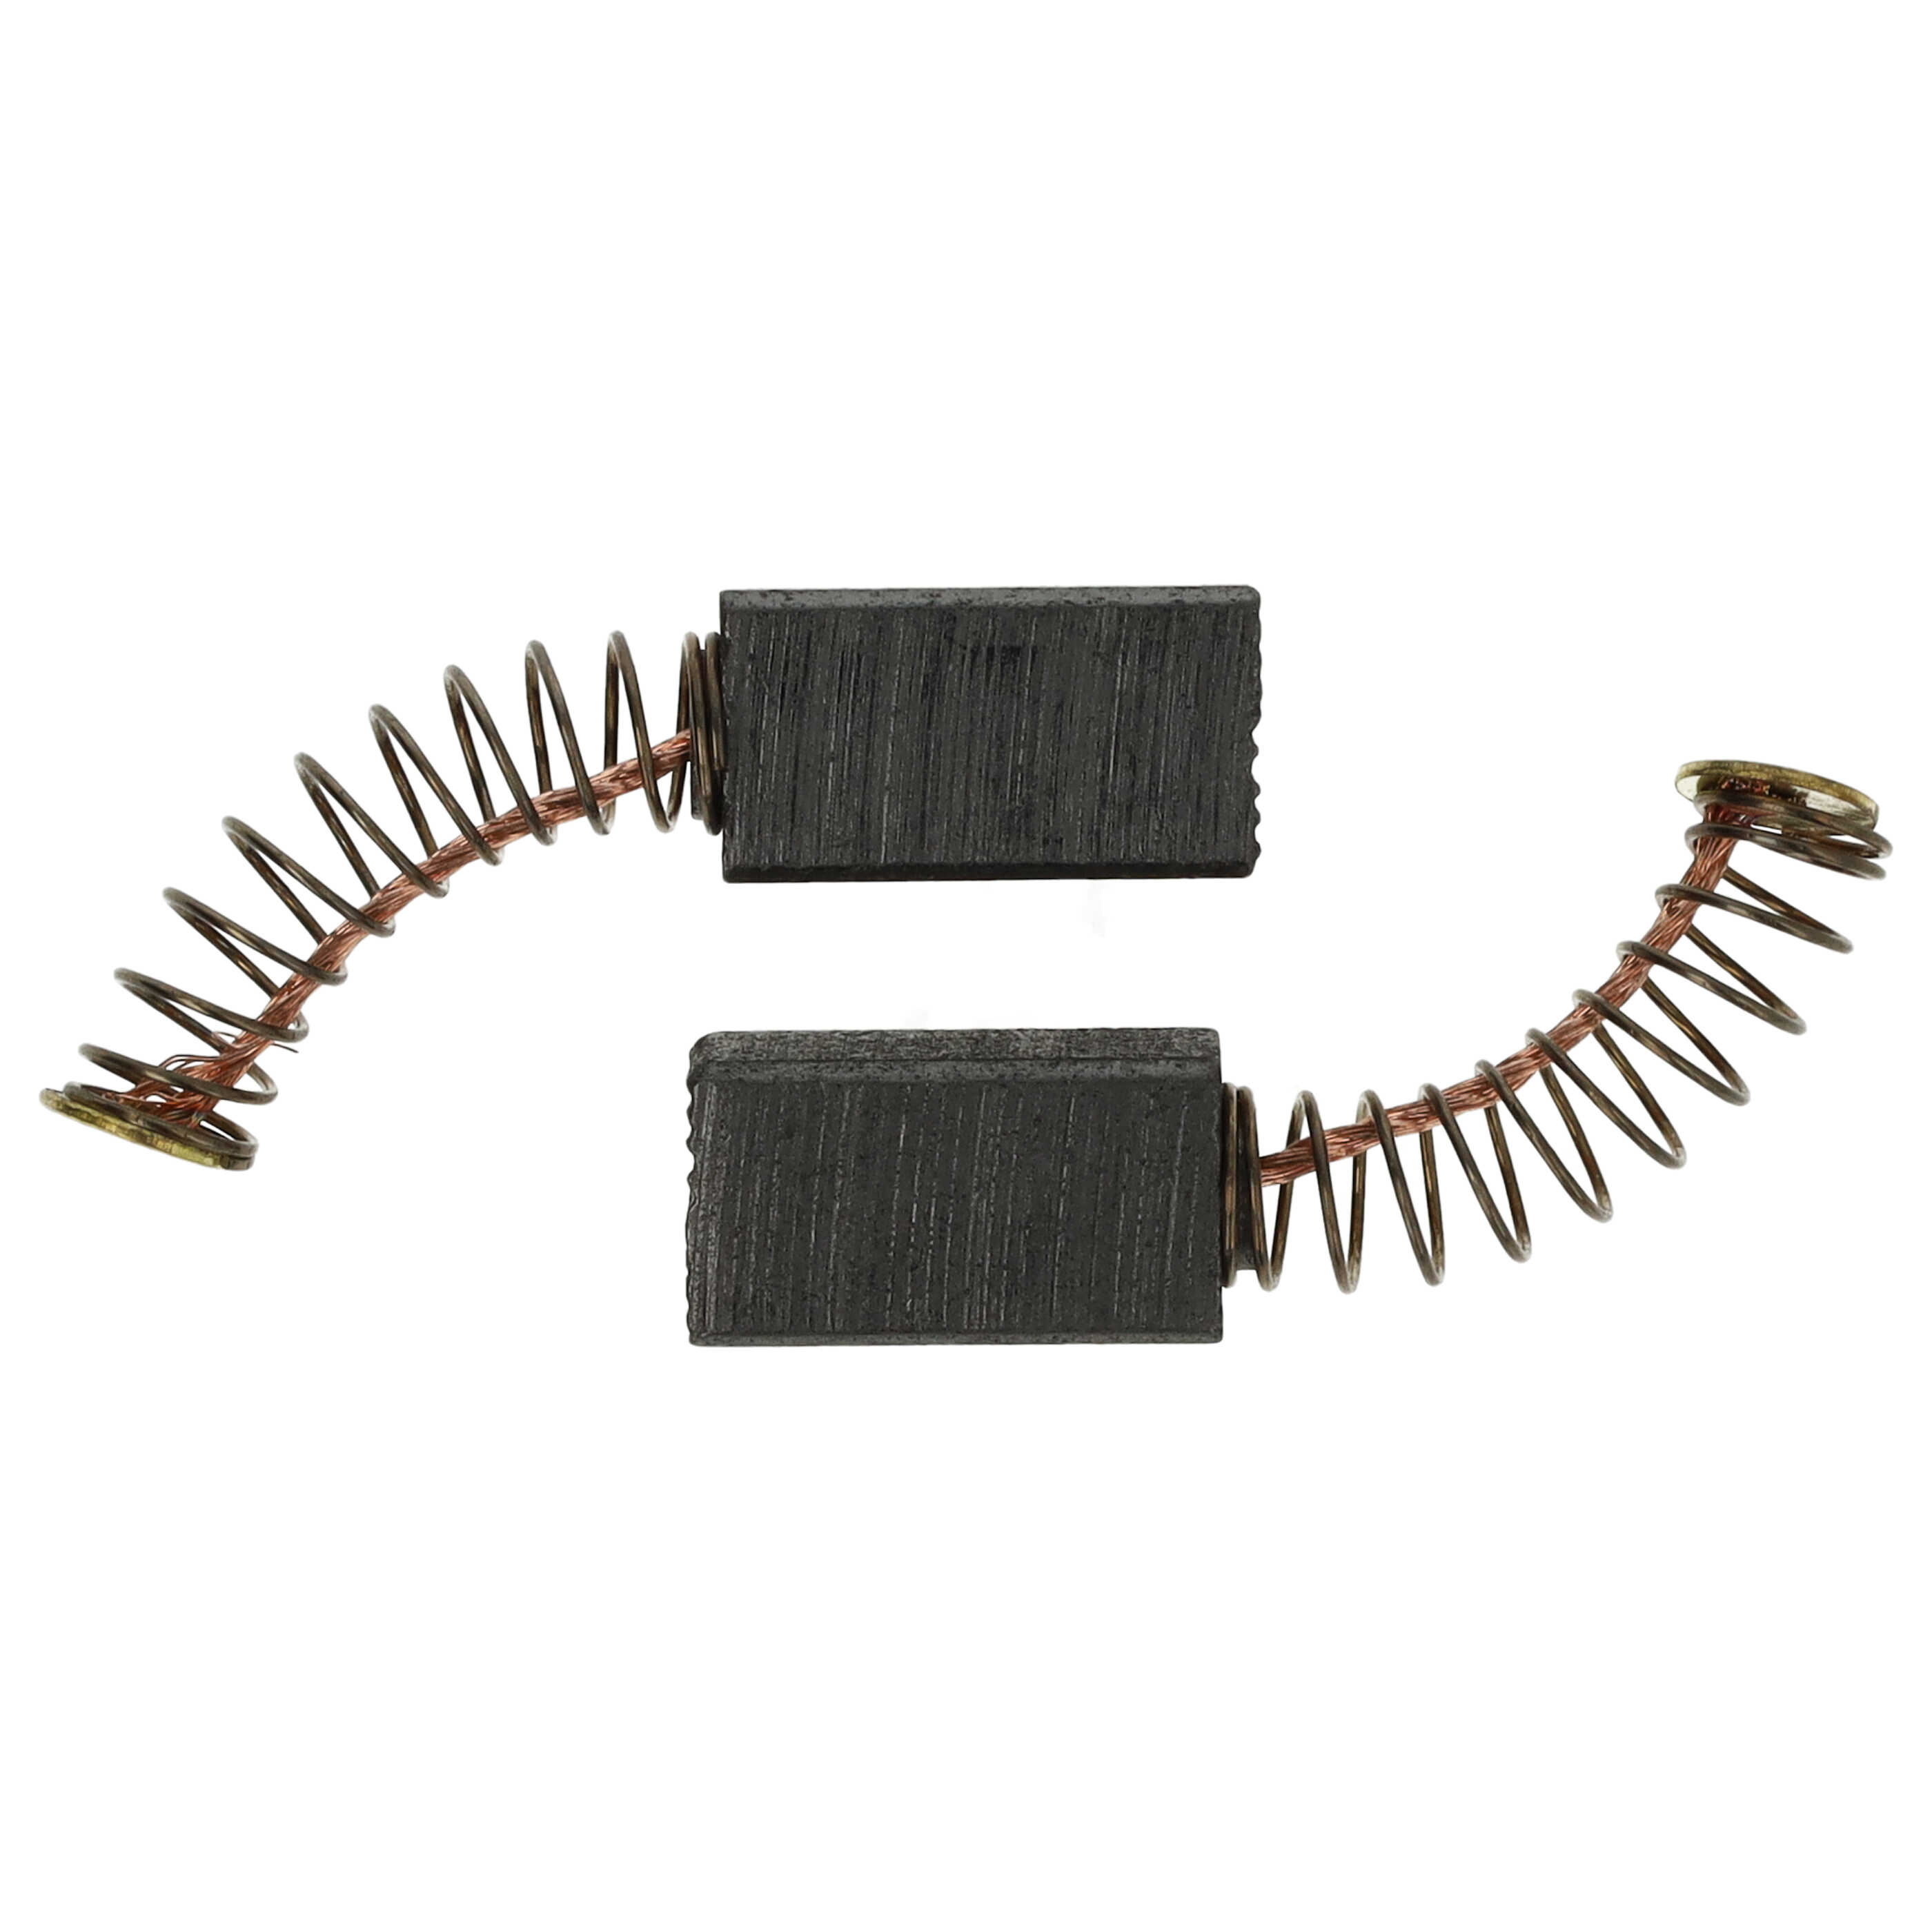 2x Carbon Brush 15 x 8 x 5 mm for power tool